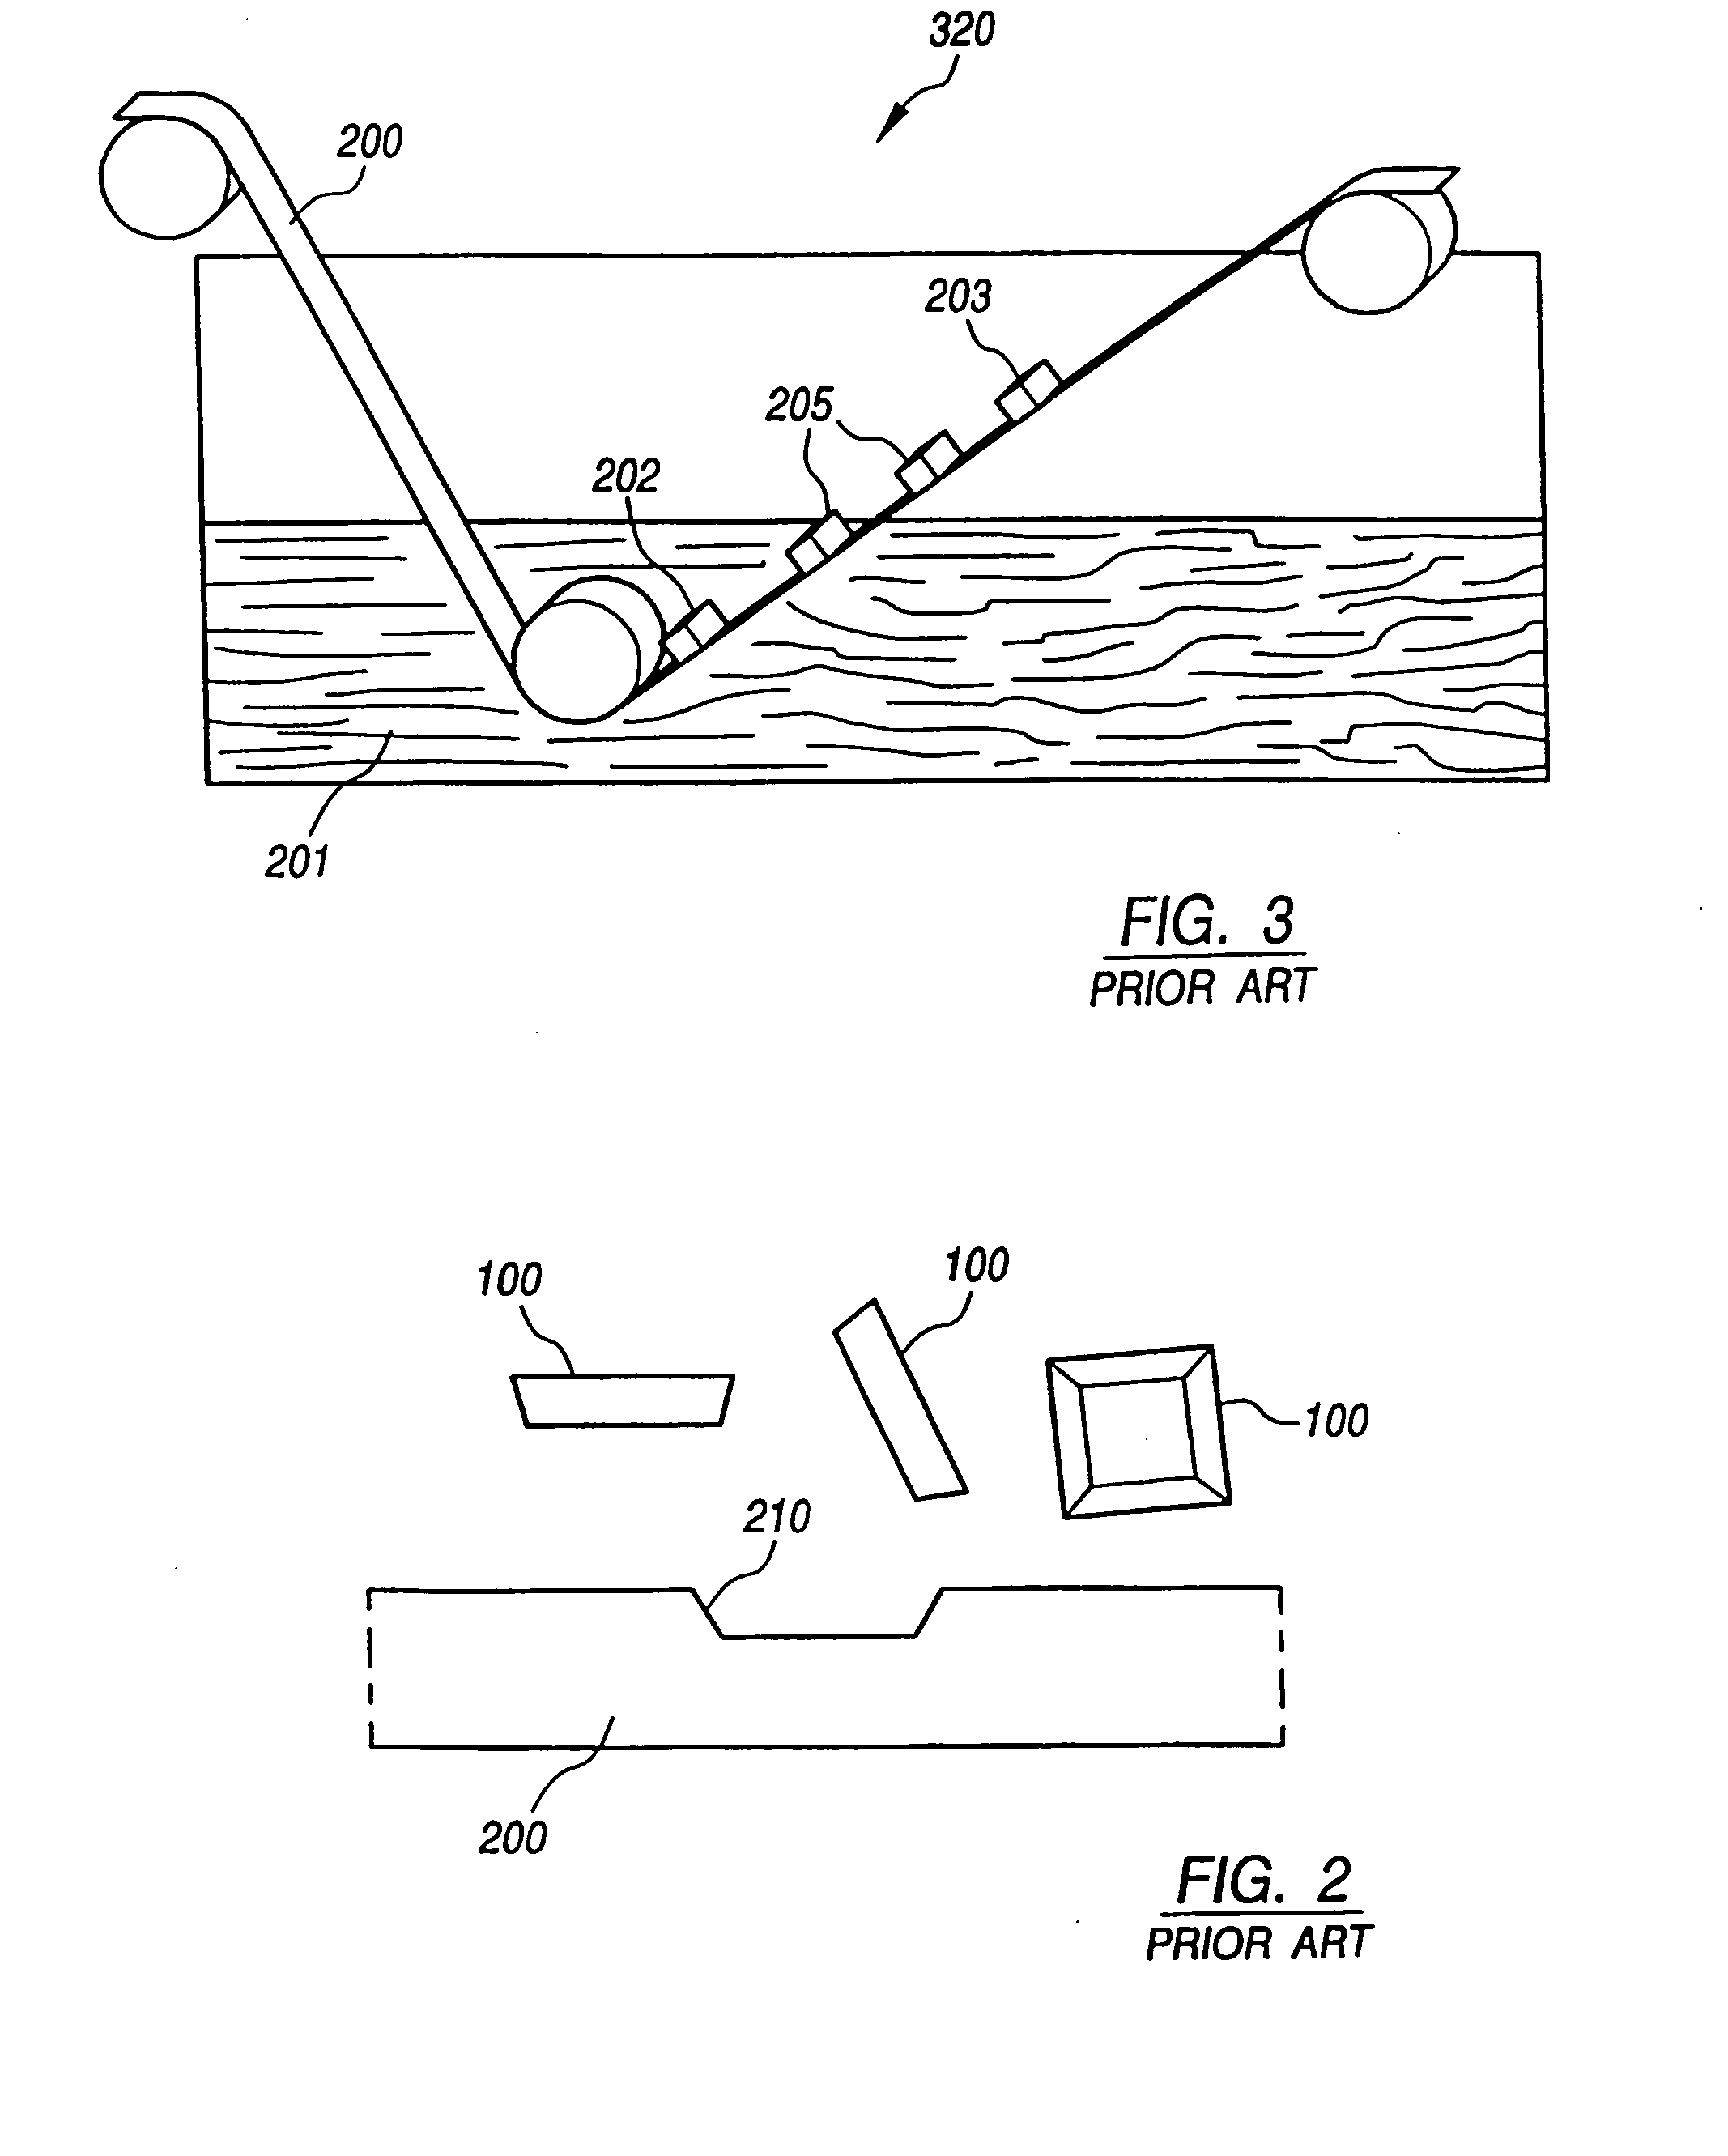 Method of making a flexible substrate containing self-assembling microstructures